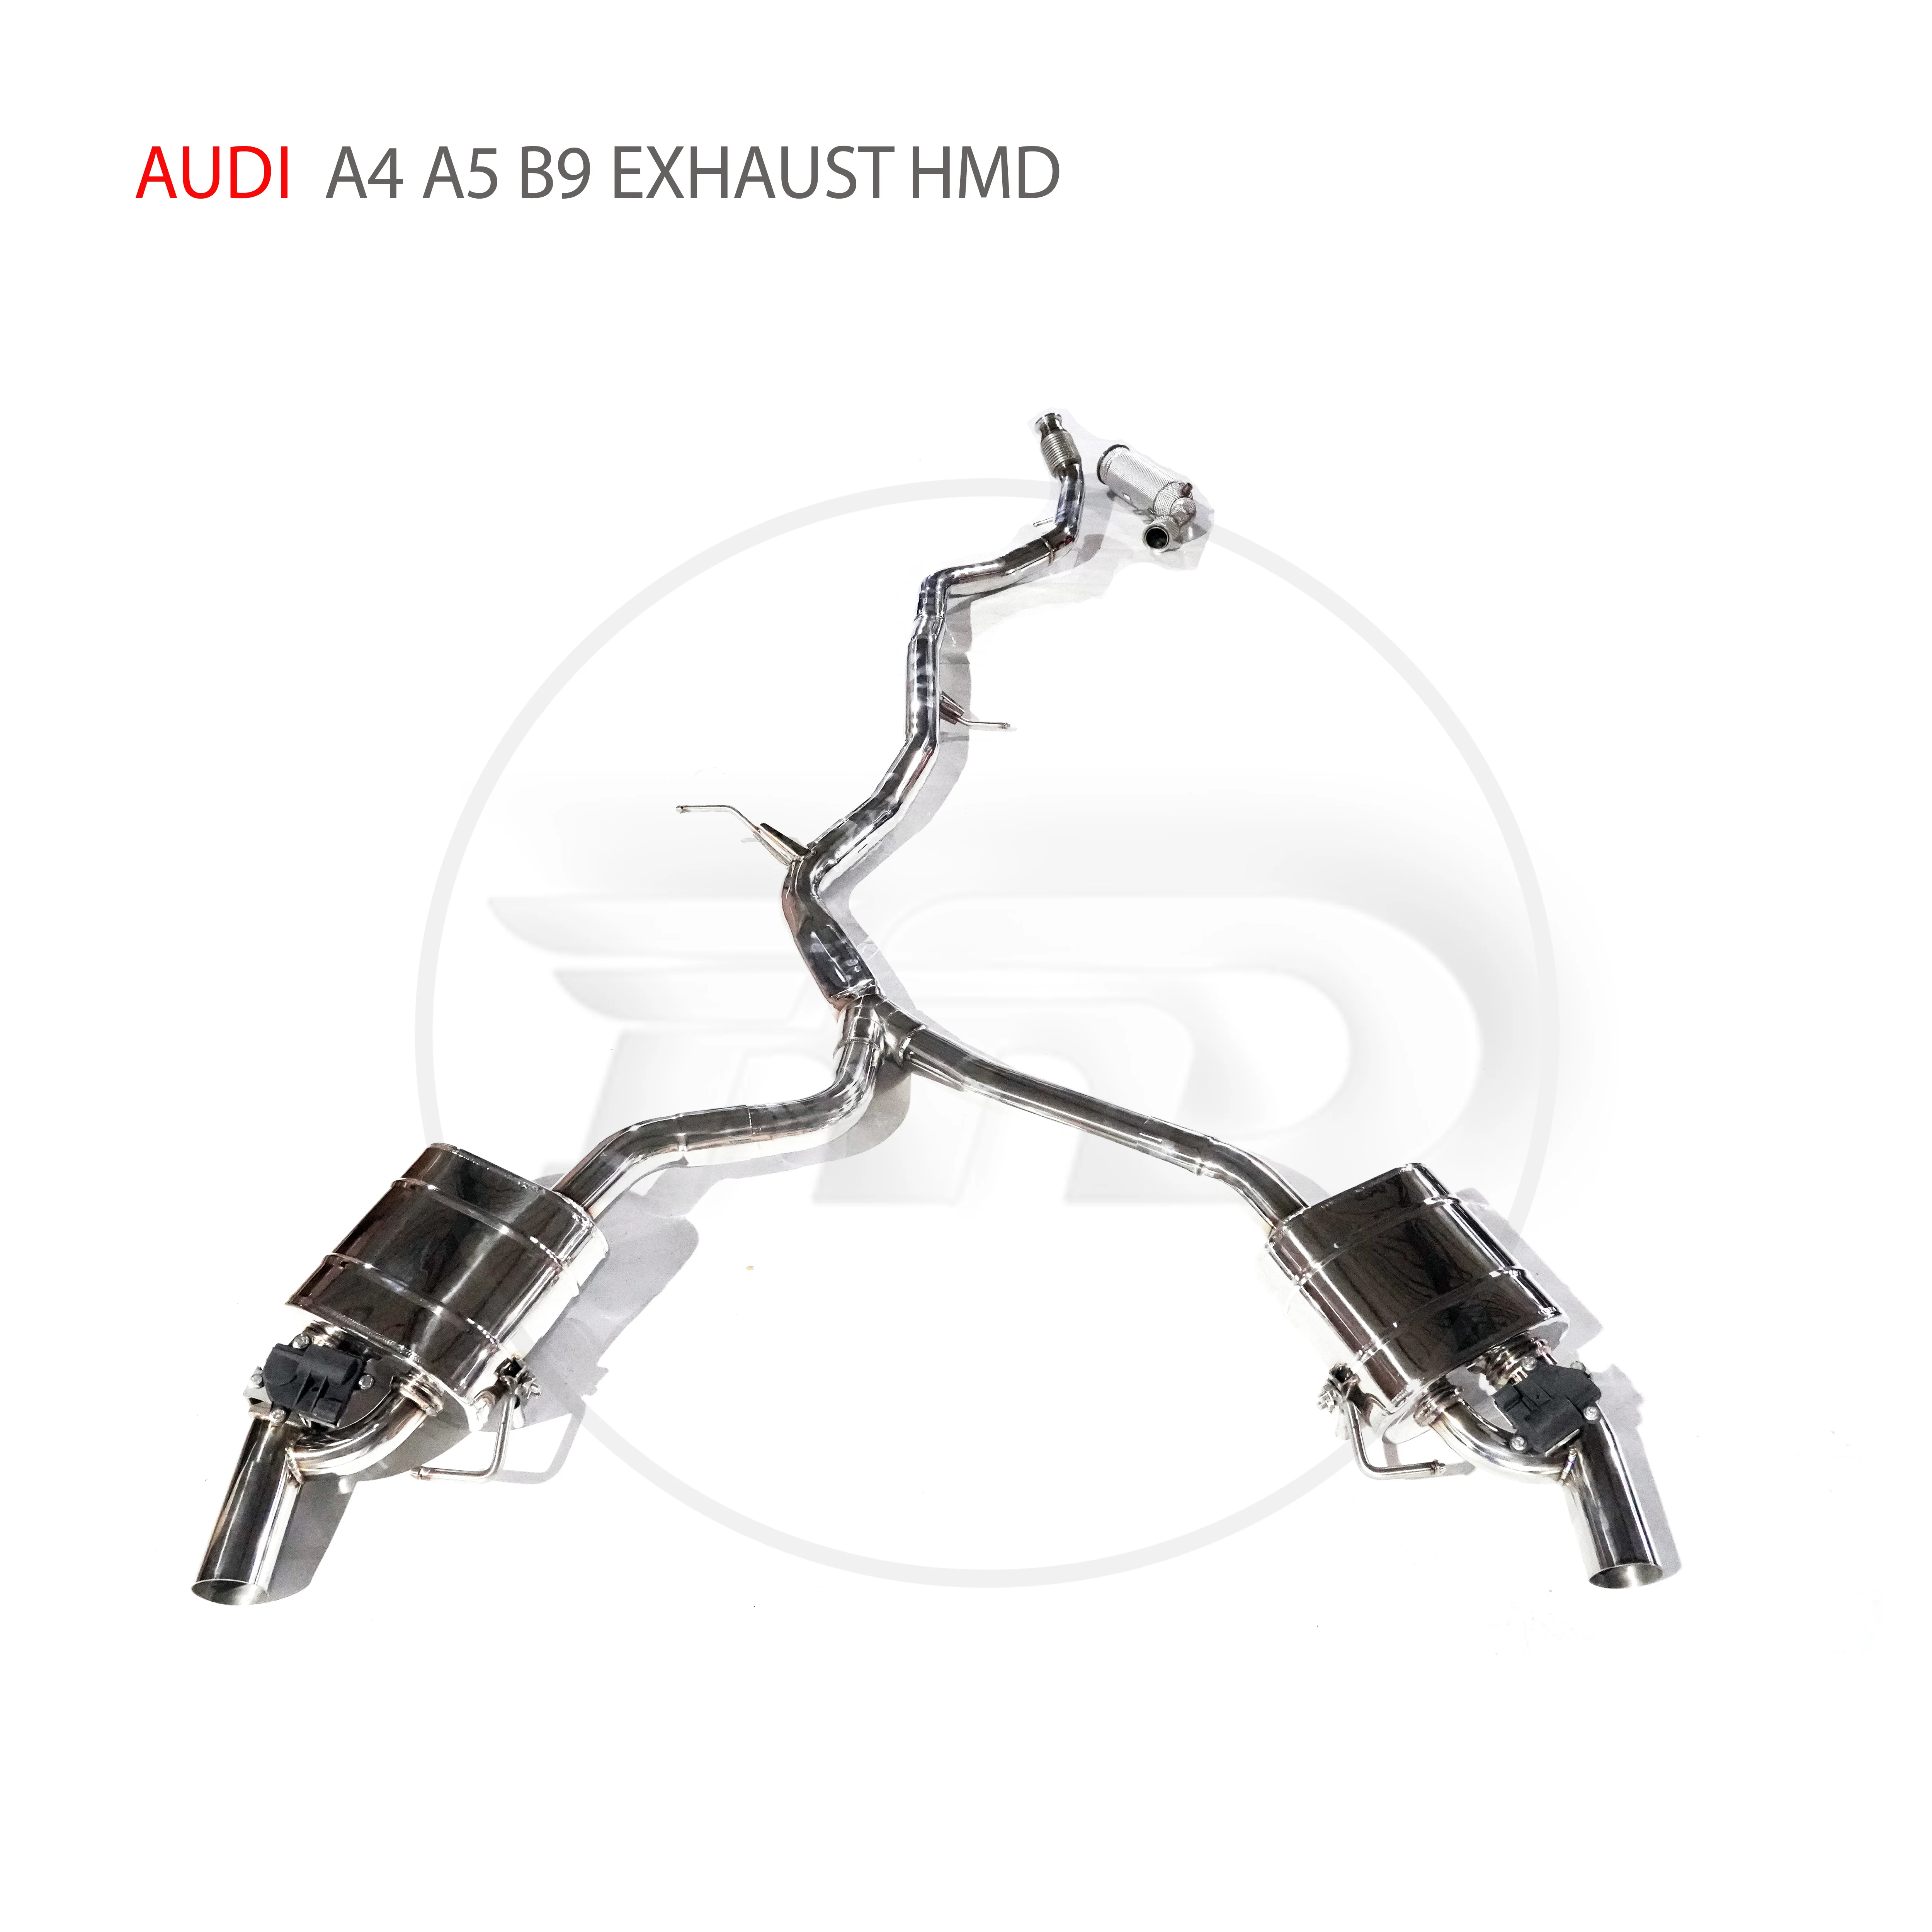 

HMD Stainless Steel Exhaust System Performance Downpipe And Catback for Audi A4 A5 B9 Auto Modification Electronic Valve